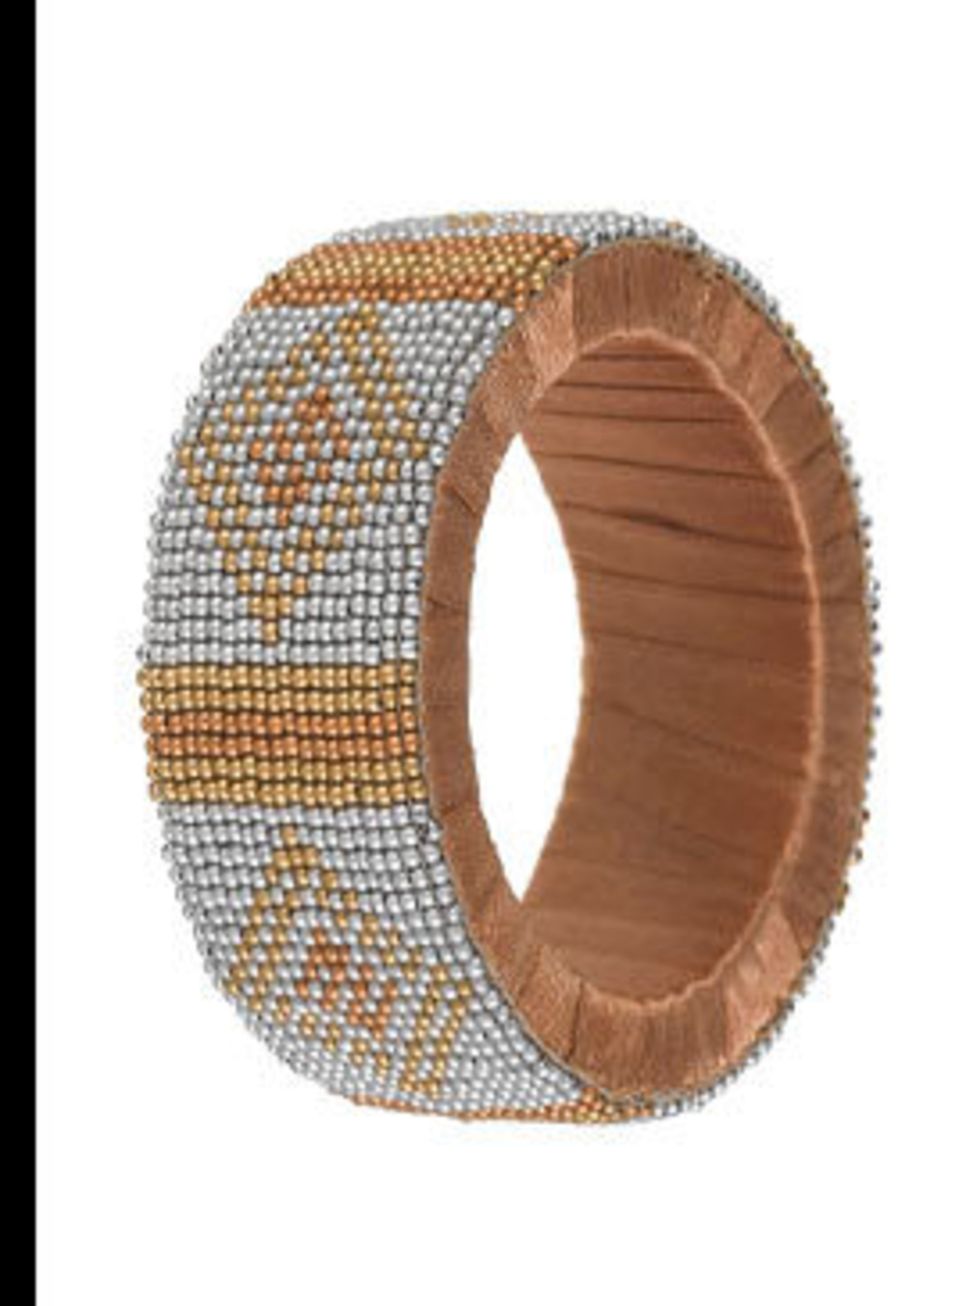 <p>Bangle, £12 by <a href="http://www.marksandspencer.com/gp/node/n/42966030/276-7919945-1741309?intid=gnav_hp_img">Marks and Spencer</a></p>